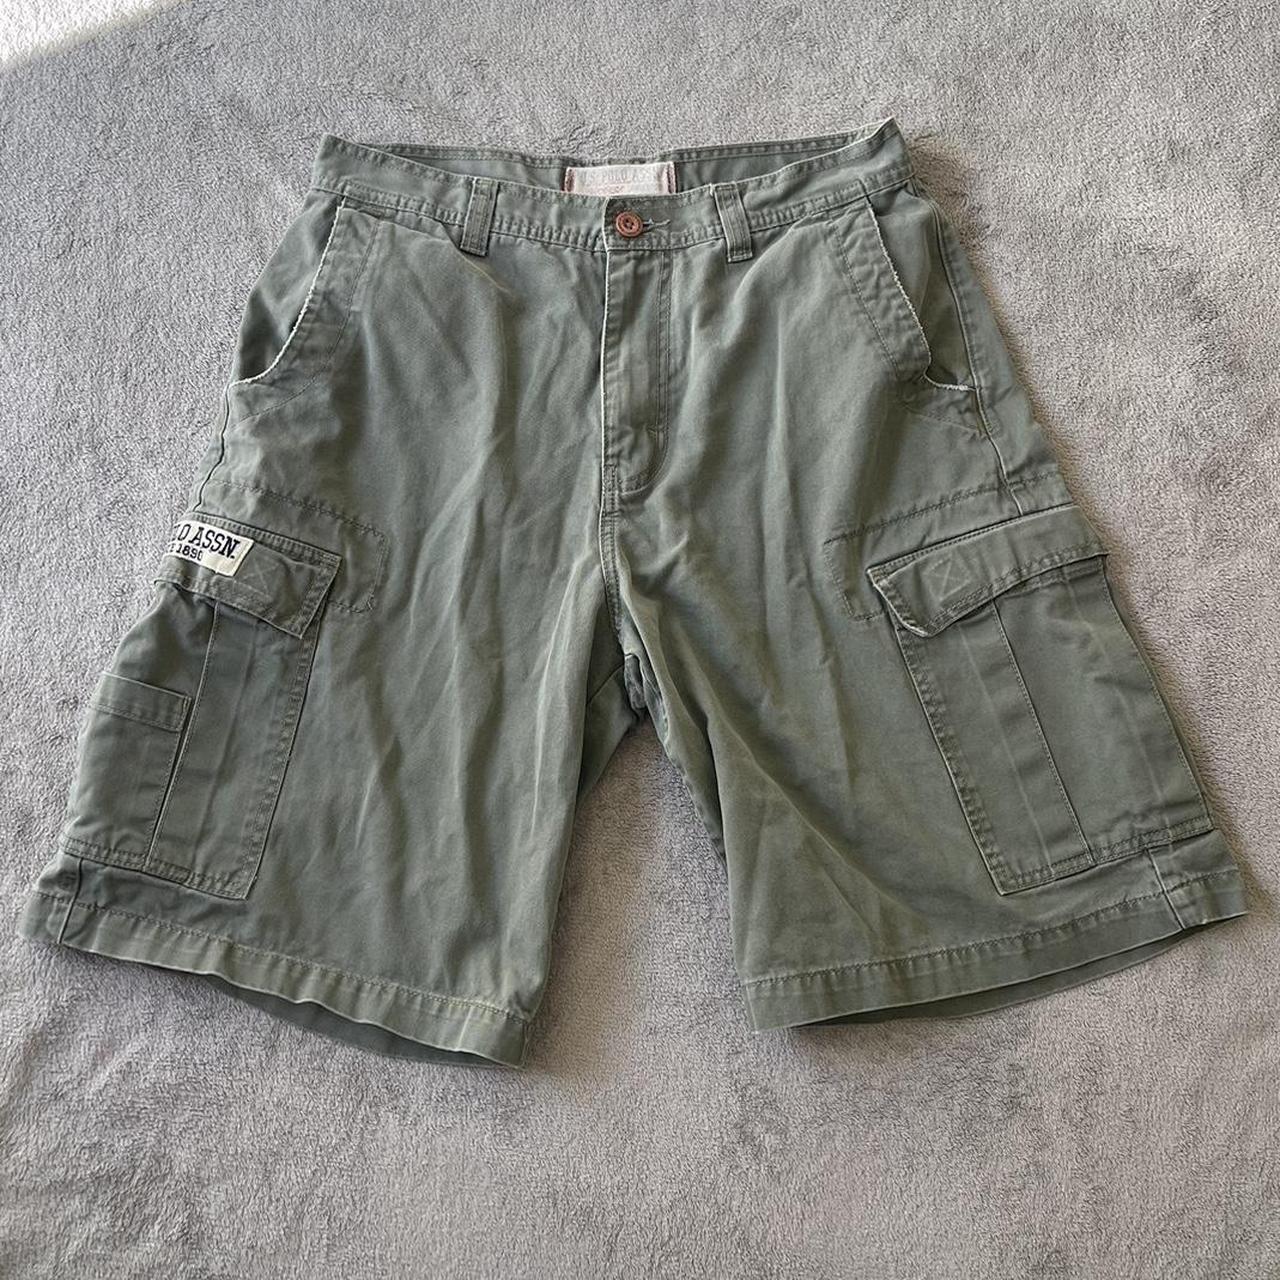 U.S Polo Cargo Shorts Size 31 Great condition and... - Depop